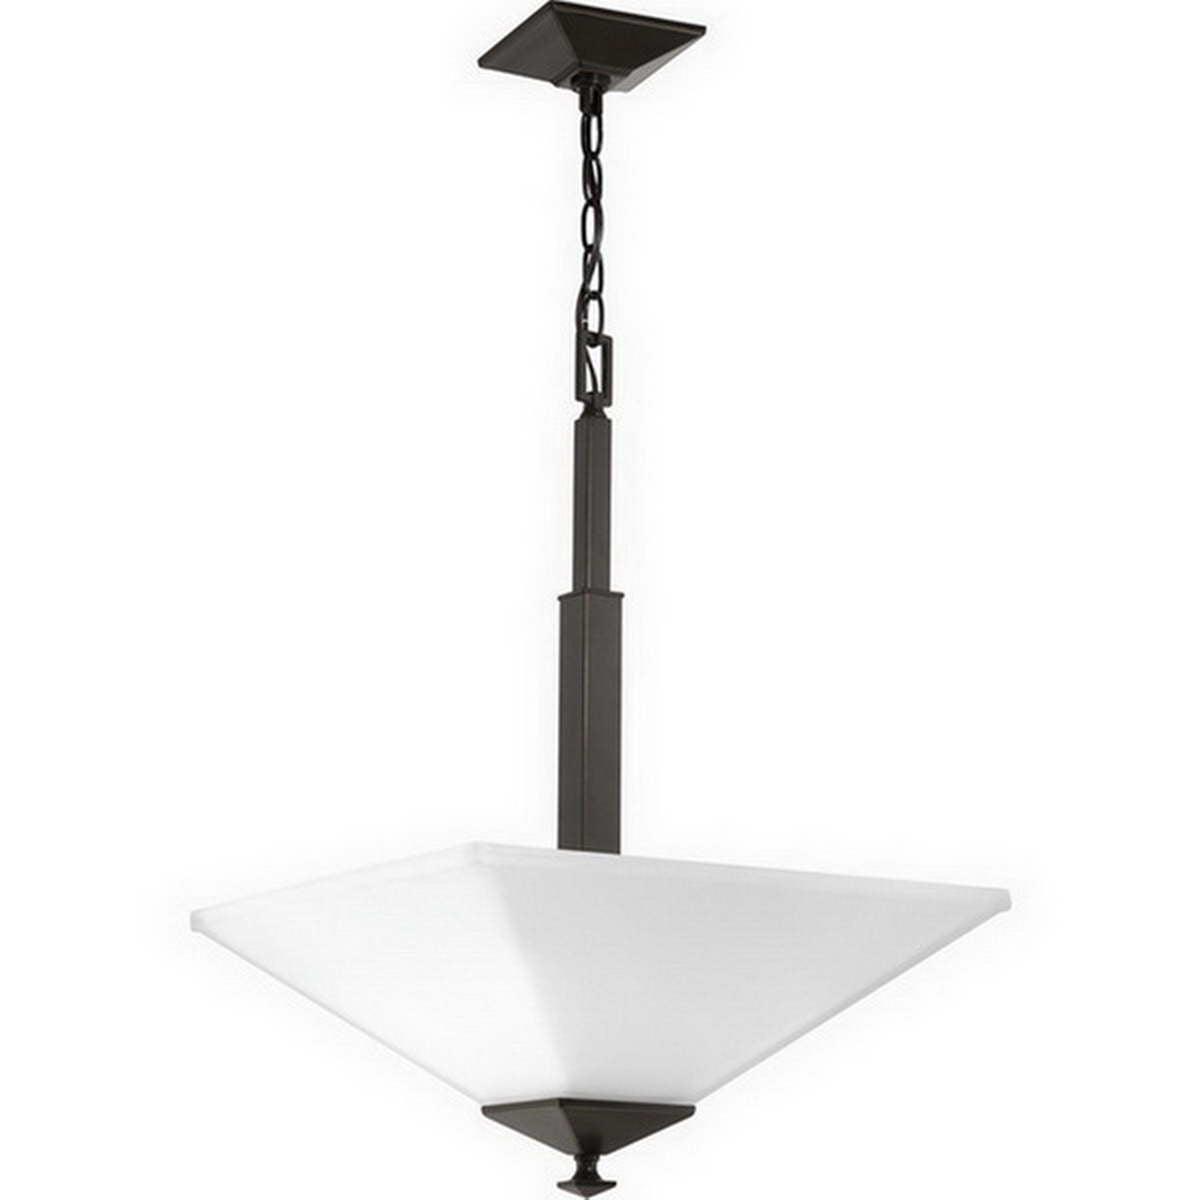 Clifton Heights 16 in. 2 Lights Pendant Light